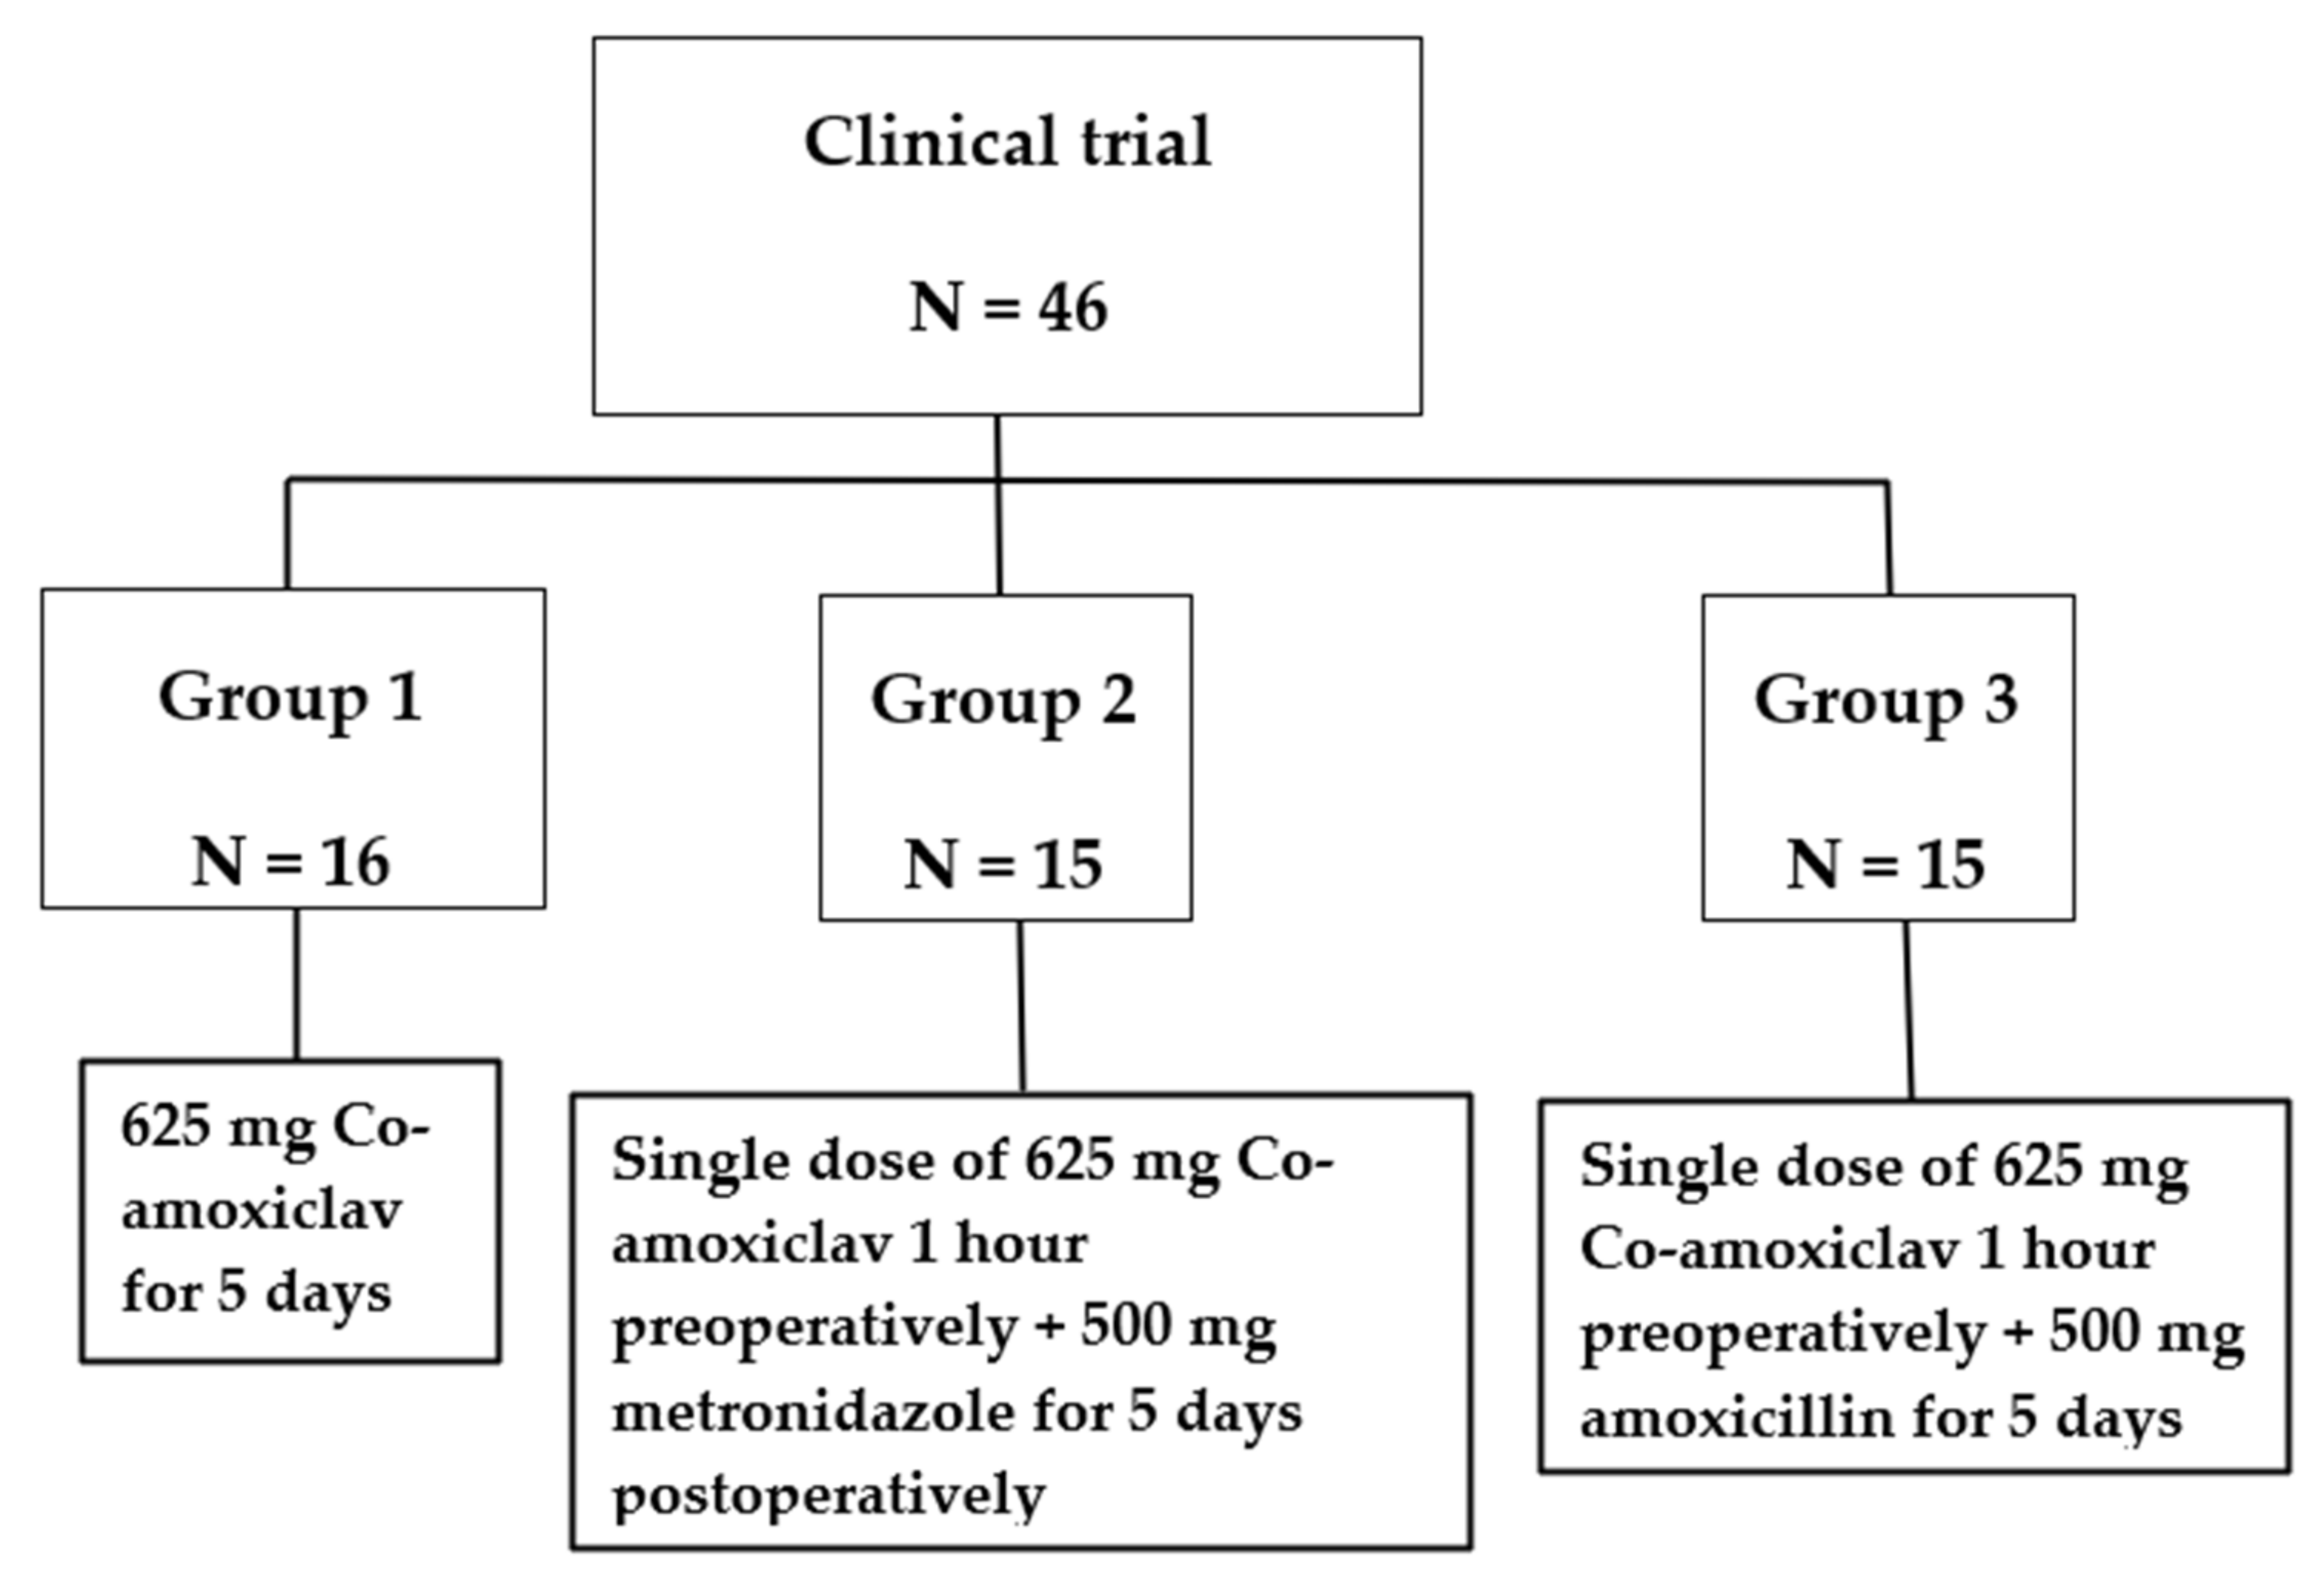 IJERPH | Free Full-Text | A Comparison of Pre-Emptive Co-Amoxiclav,  Postoperative Amoxicillin, and Metronidazole for Prevention of  Postoperative Complications in Dentoalveolar Surgery: A Randomized  Controlled Trial